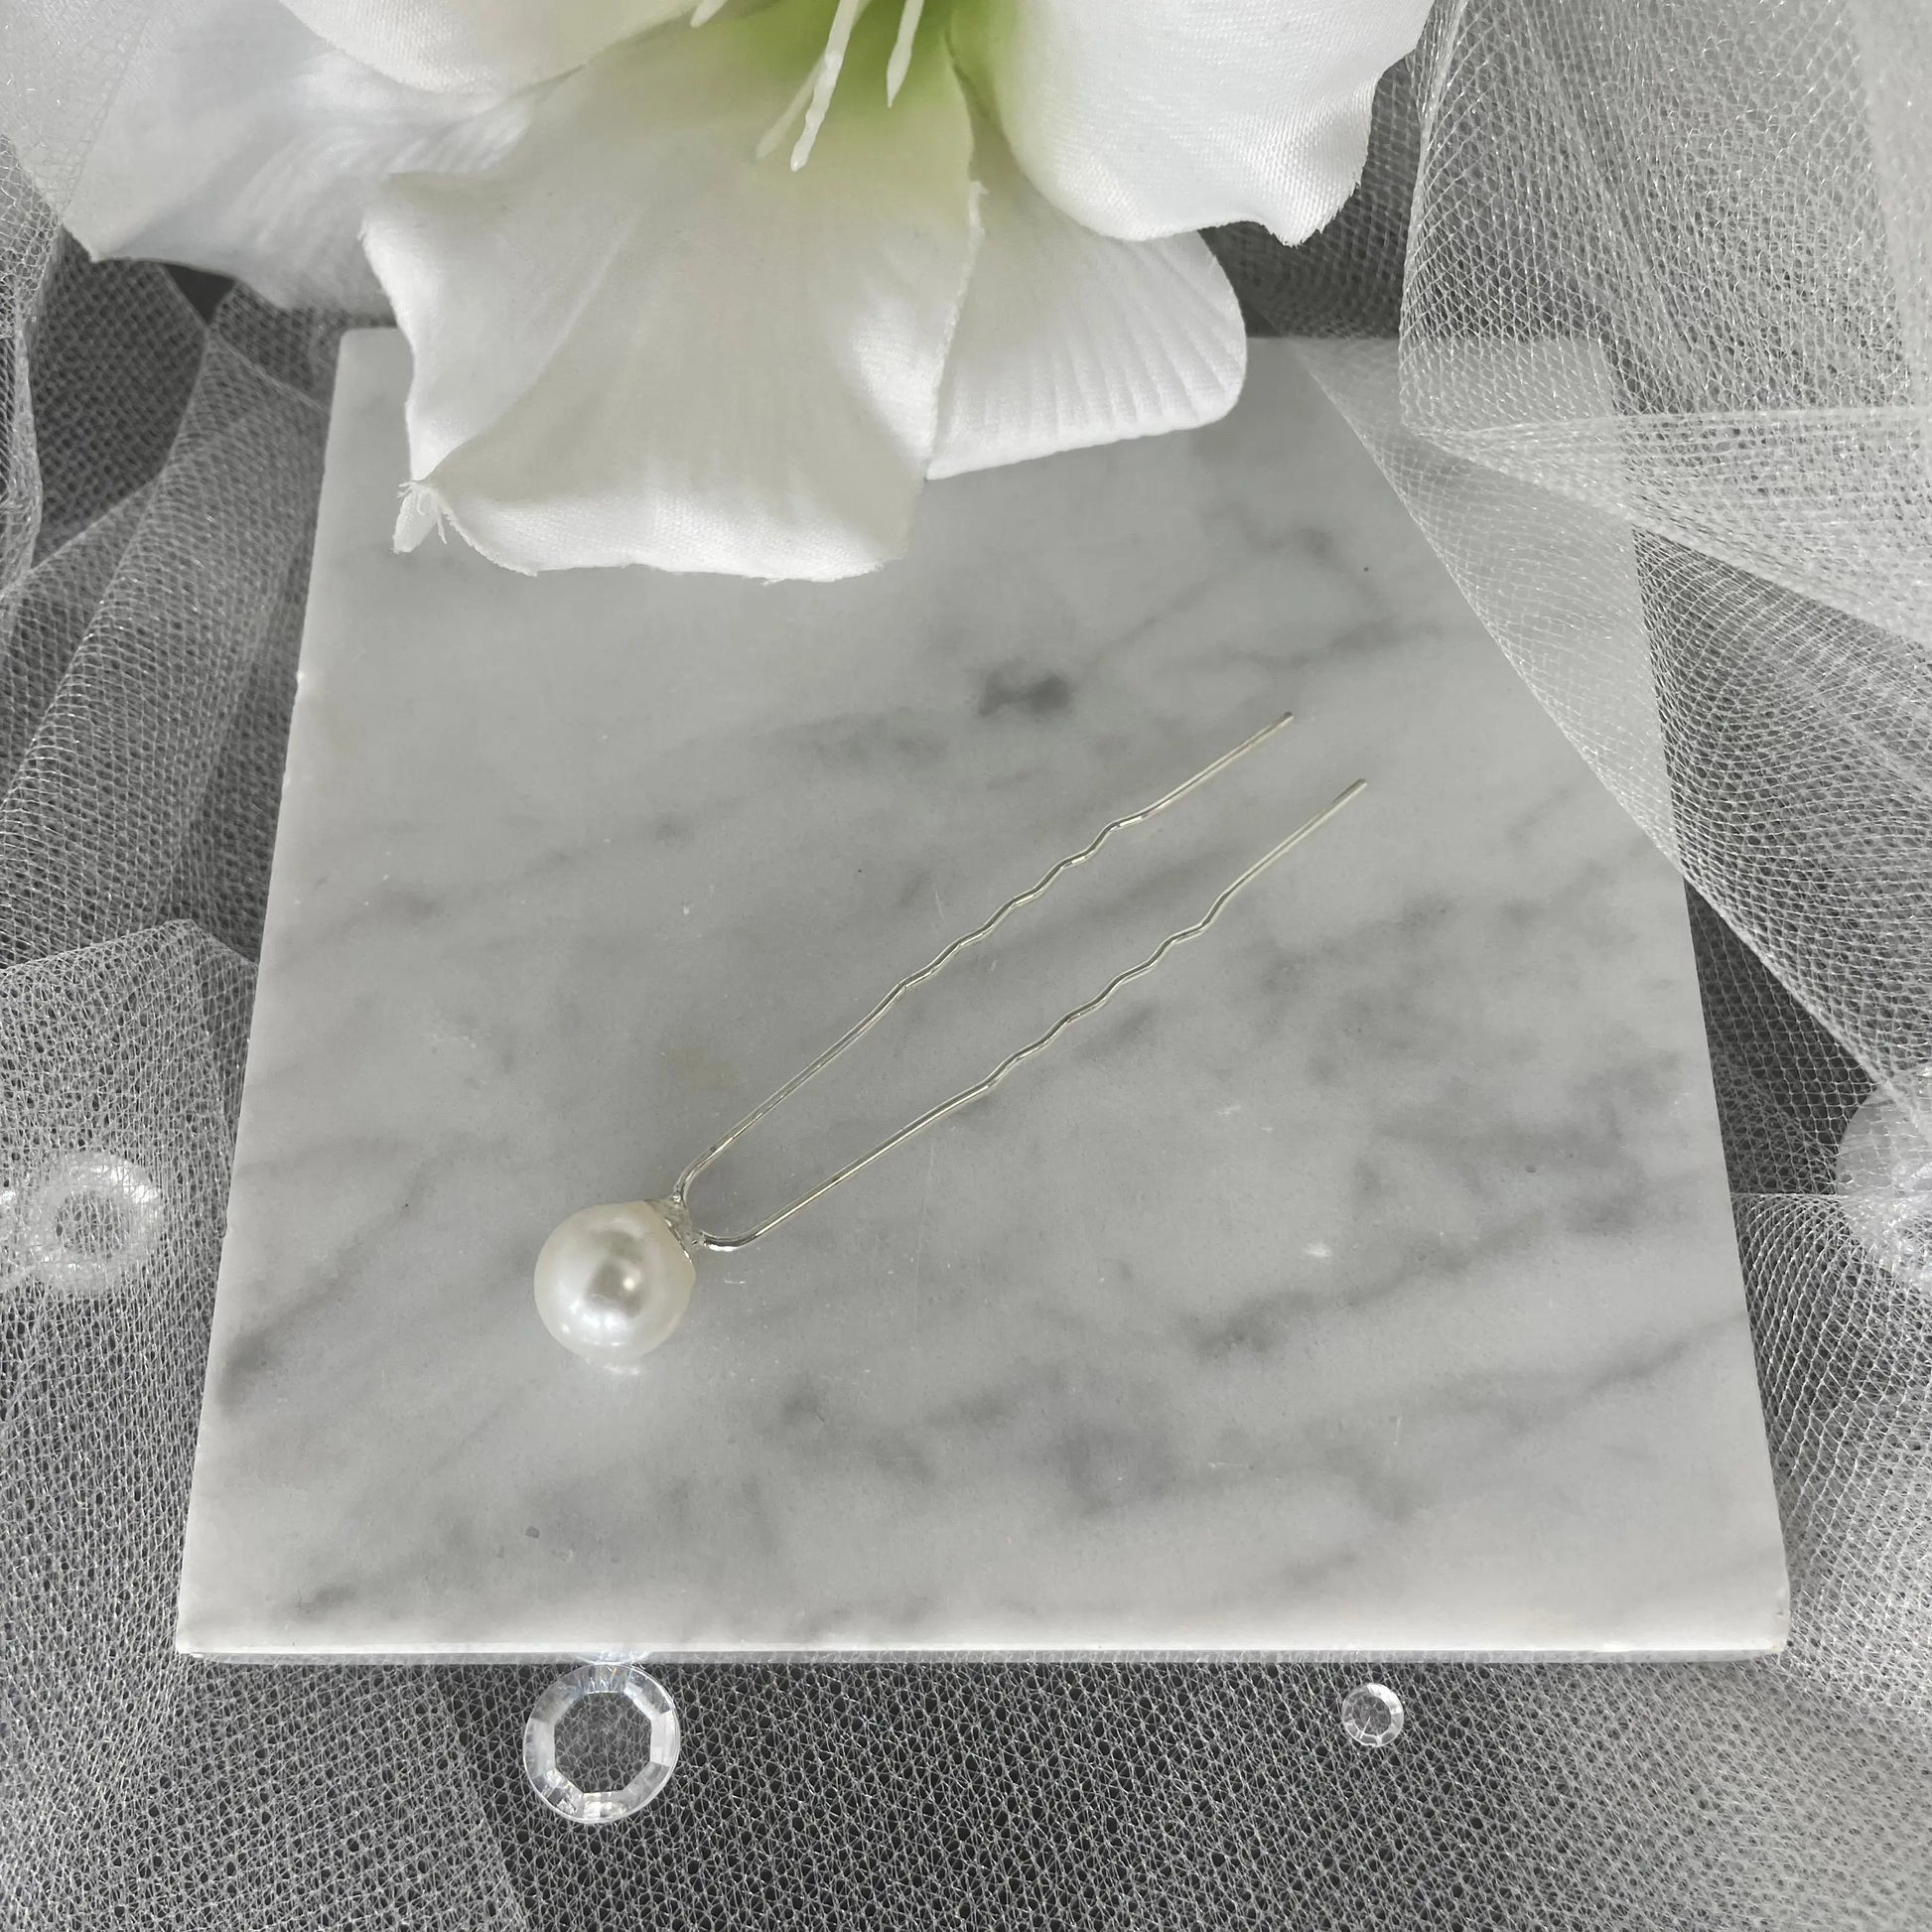 Bridal Pearl Hairpins on a silver base, perfect for enhancing wedding hairstyles with classic elegance and sophisticated pearl accents.